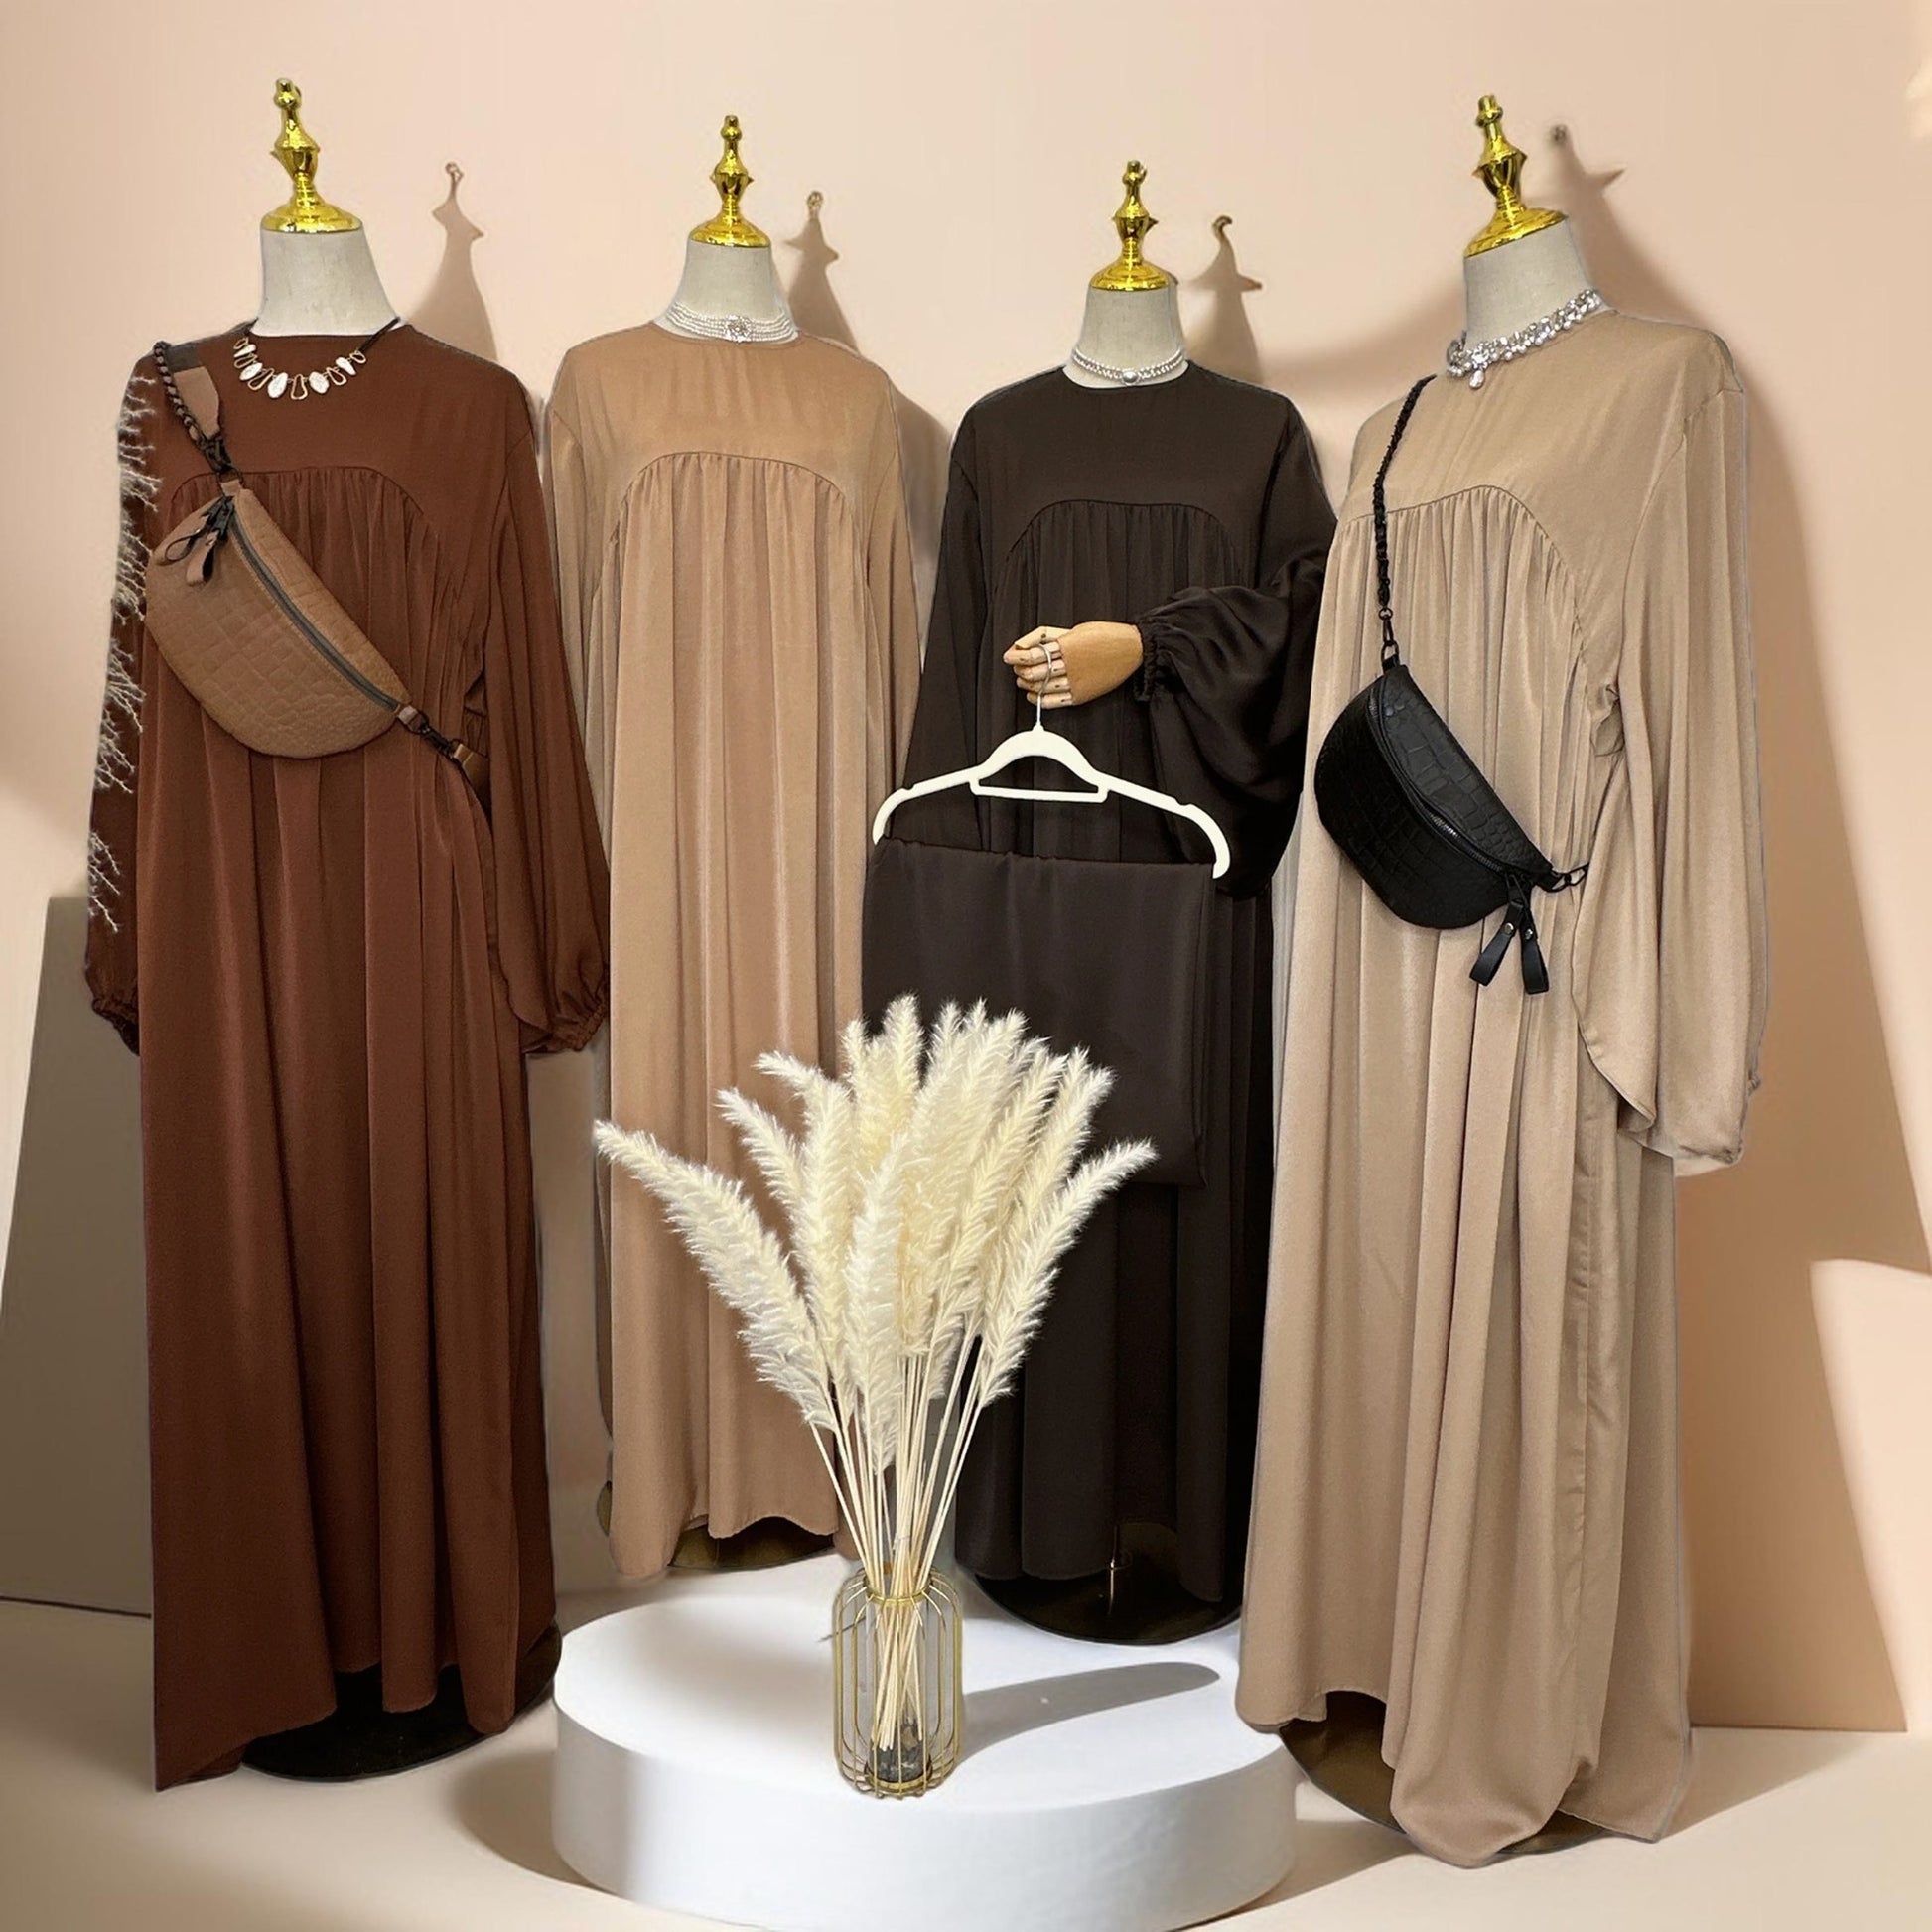 Shimmery Abaya Dress with Loose Fit - Try Modest Limited 